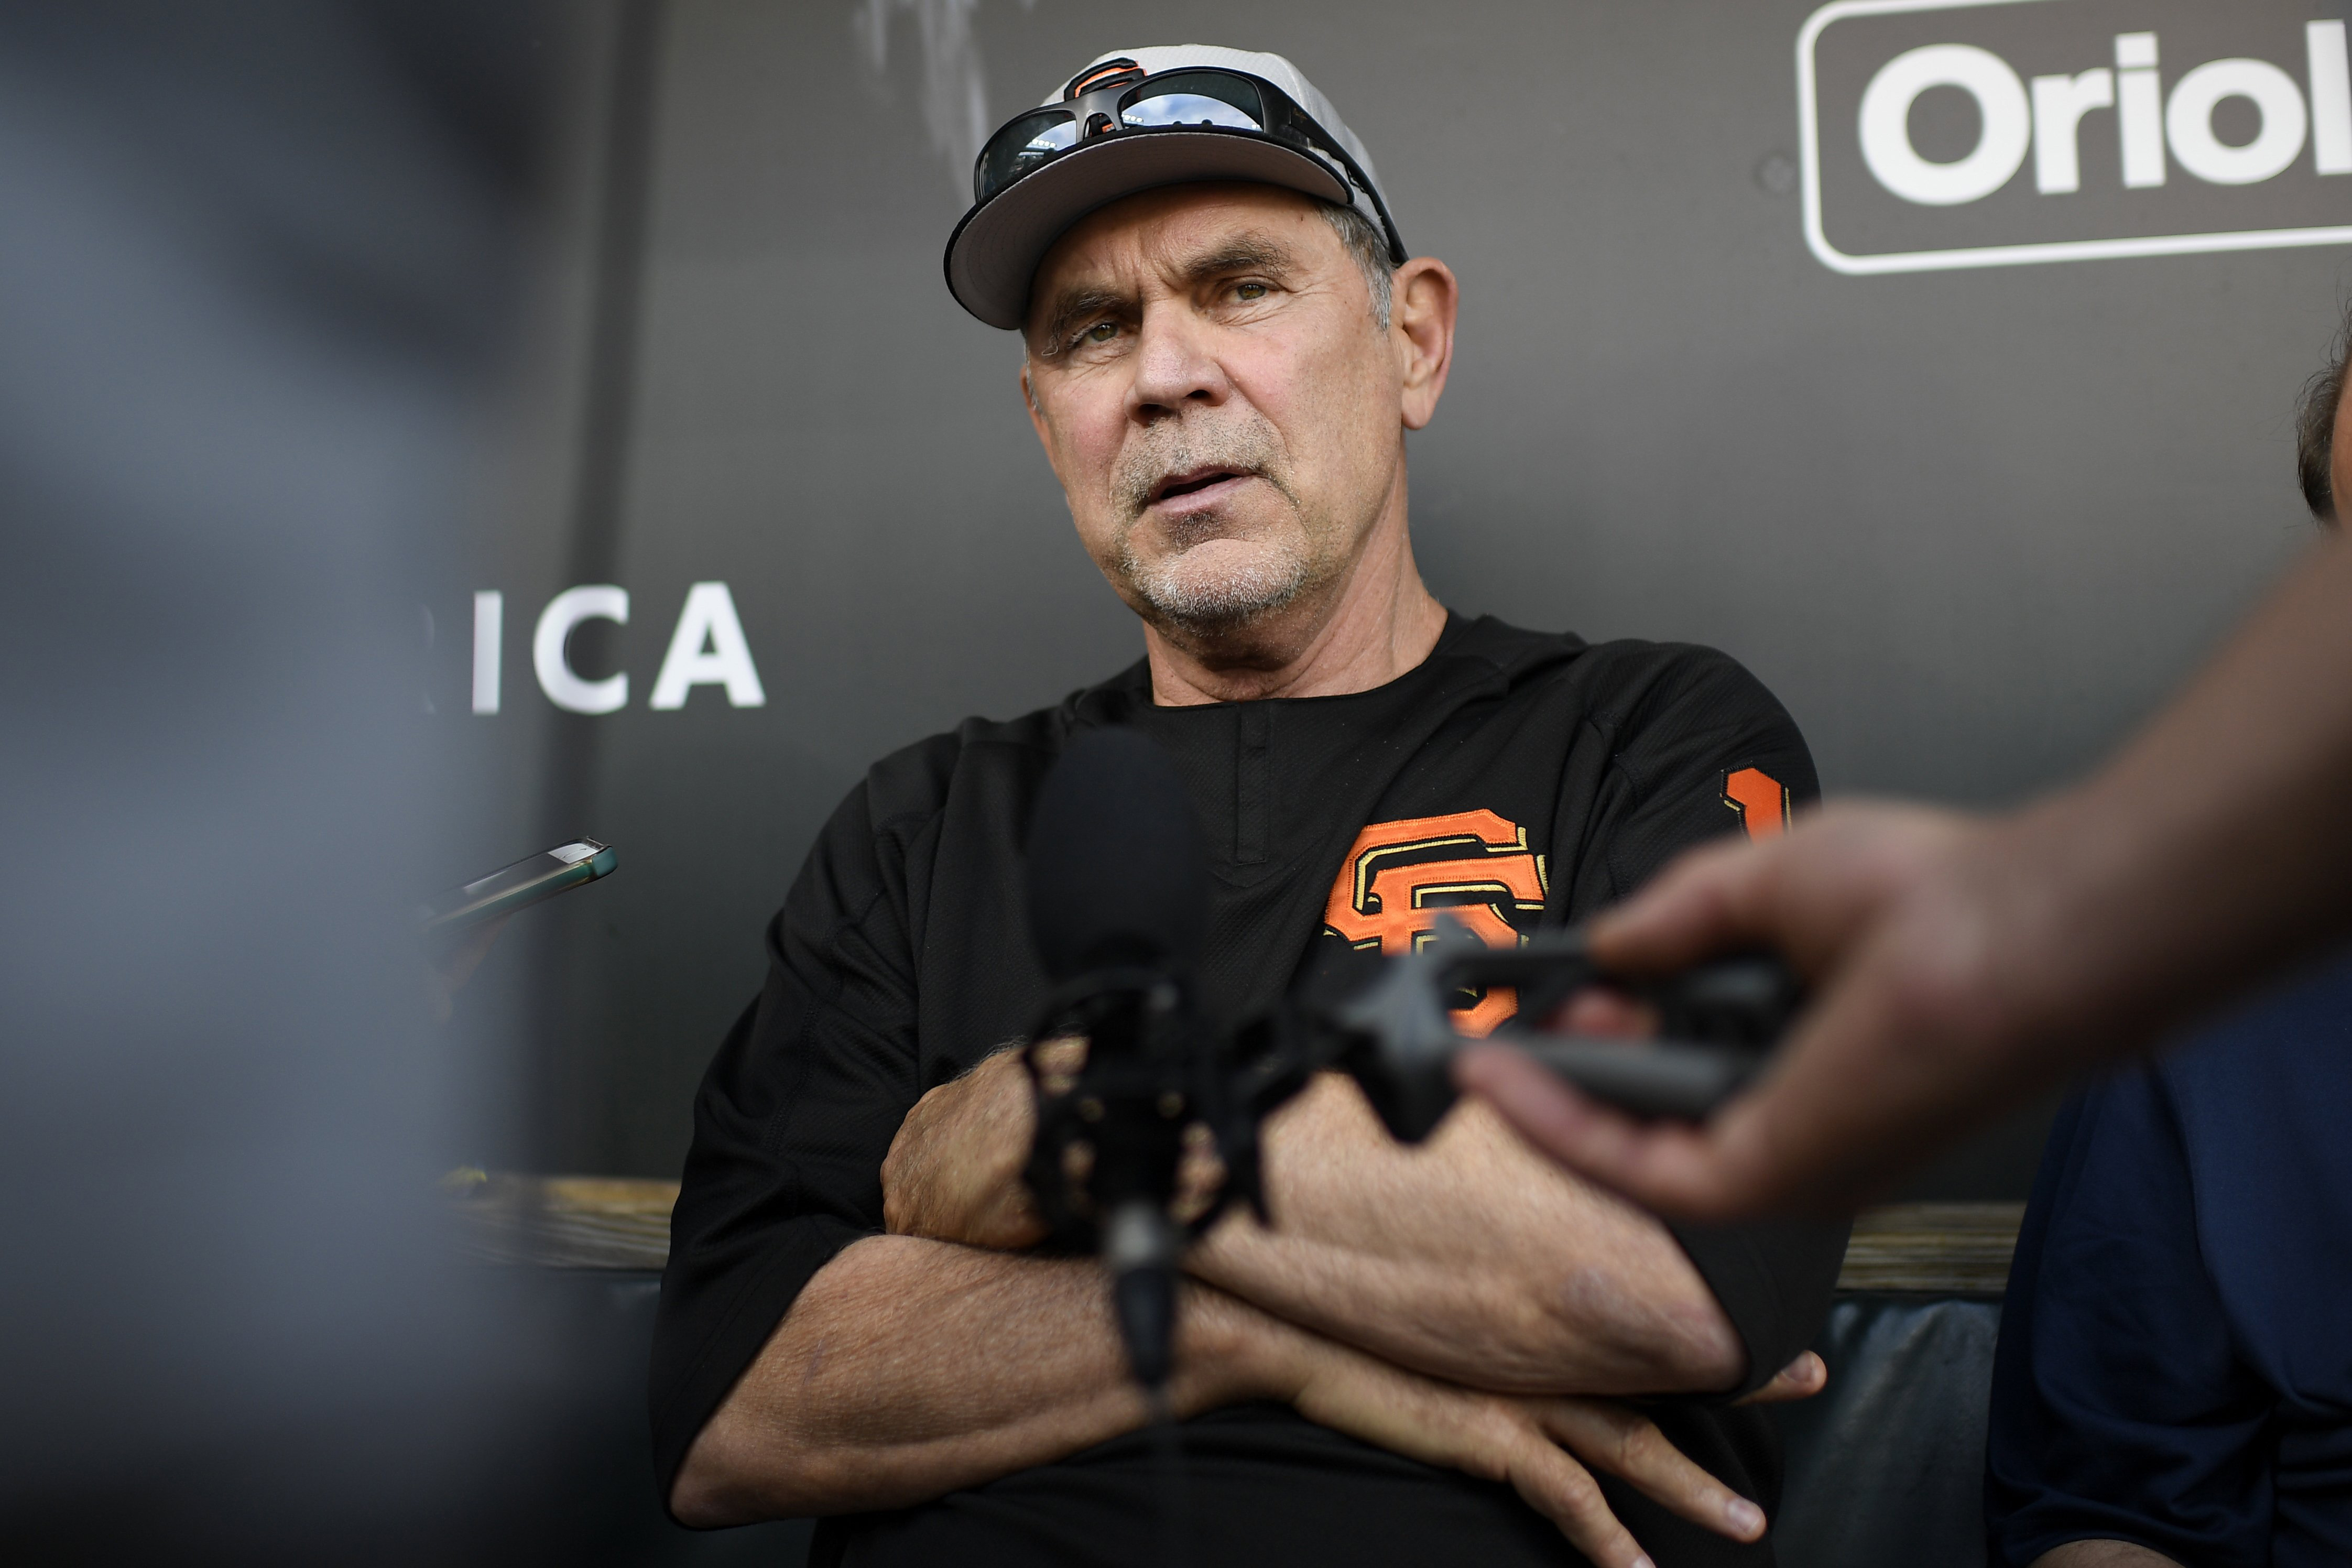 Giants manager Bruce Bochy plans to retire after 2019 season - The